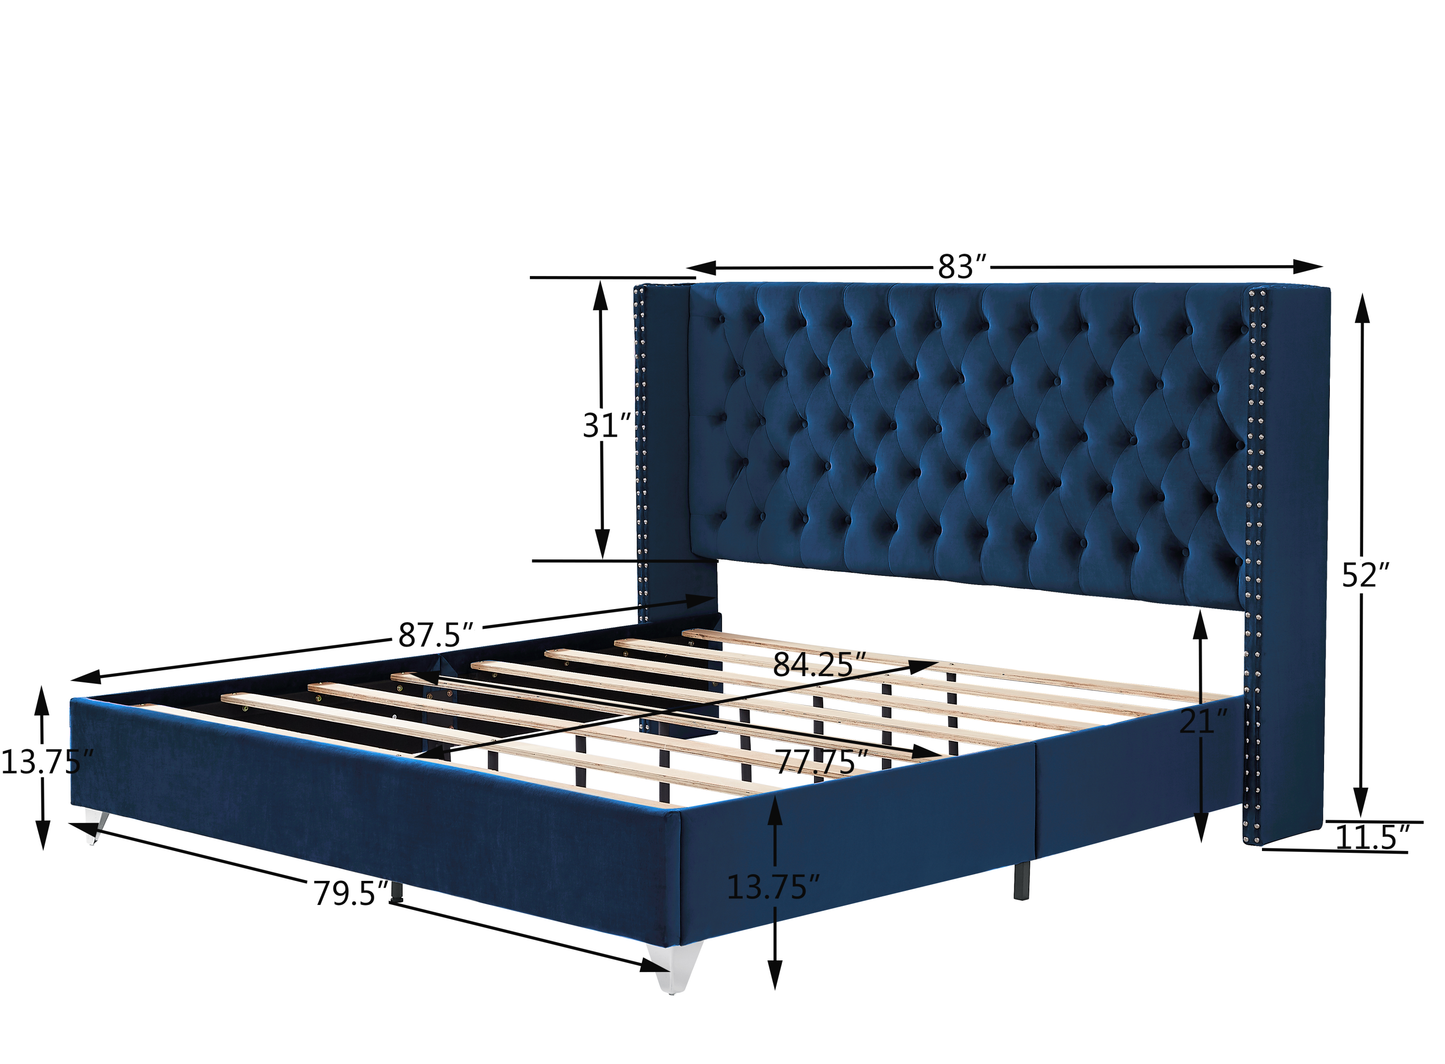 Caine King Bed (blue)